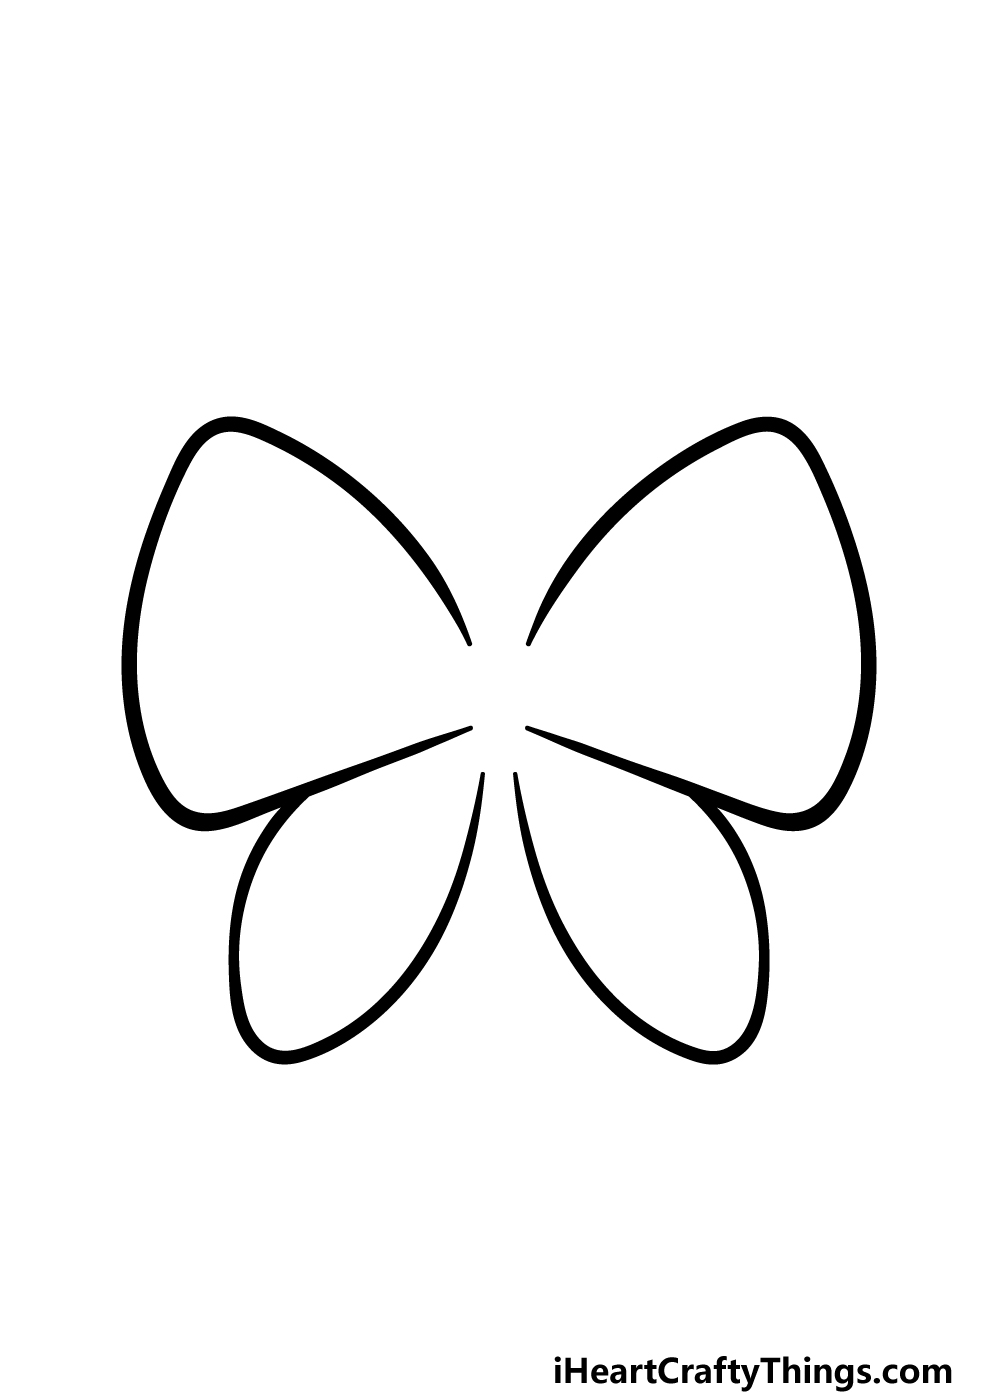 How To Draw A Butterfly: Simple Butterfly Drawing - Bright Star Kids-saigonsouth.com.vn